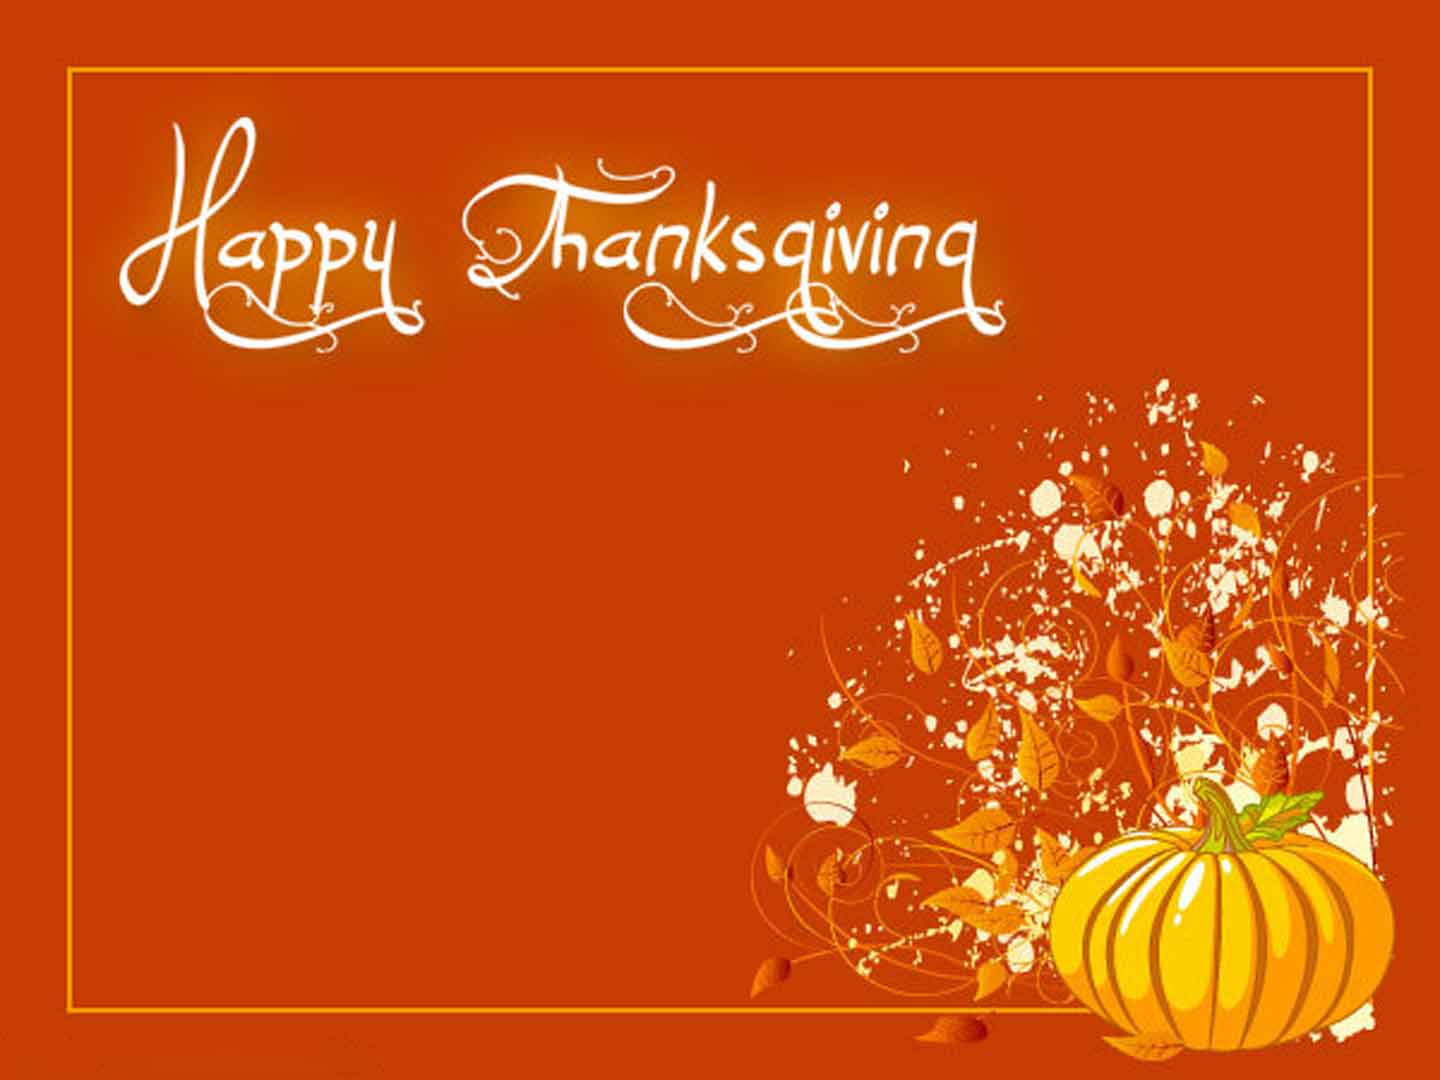 Wallpapers For > Happy Thanksgiving Backgrounds Image